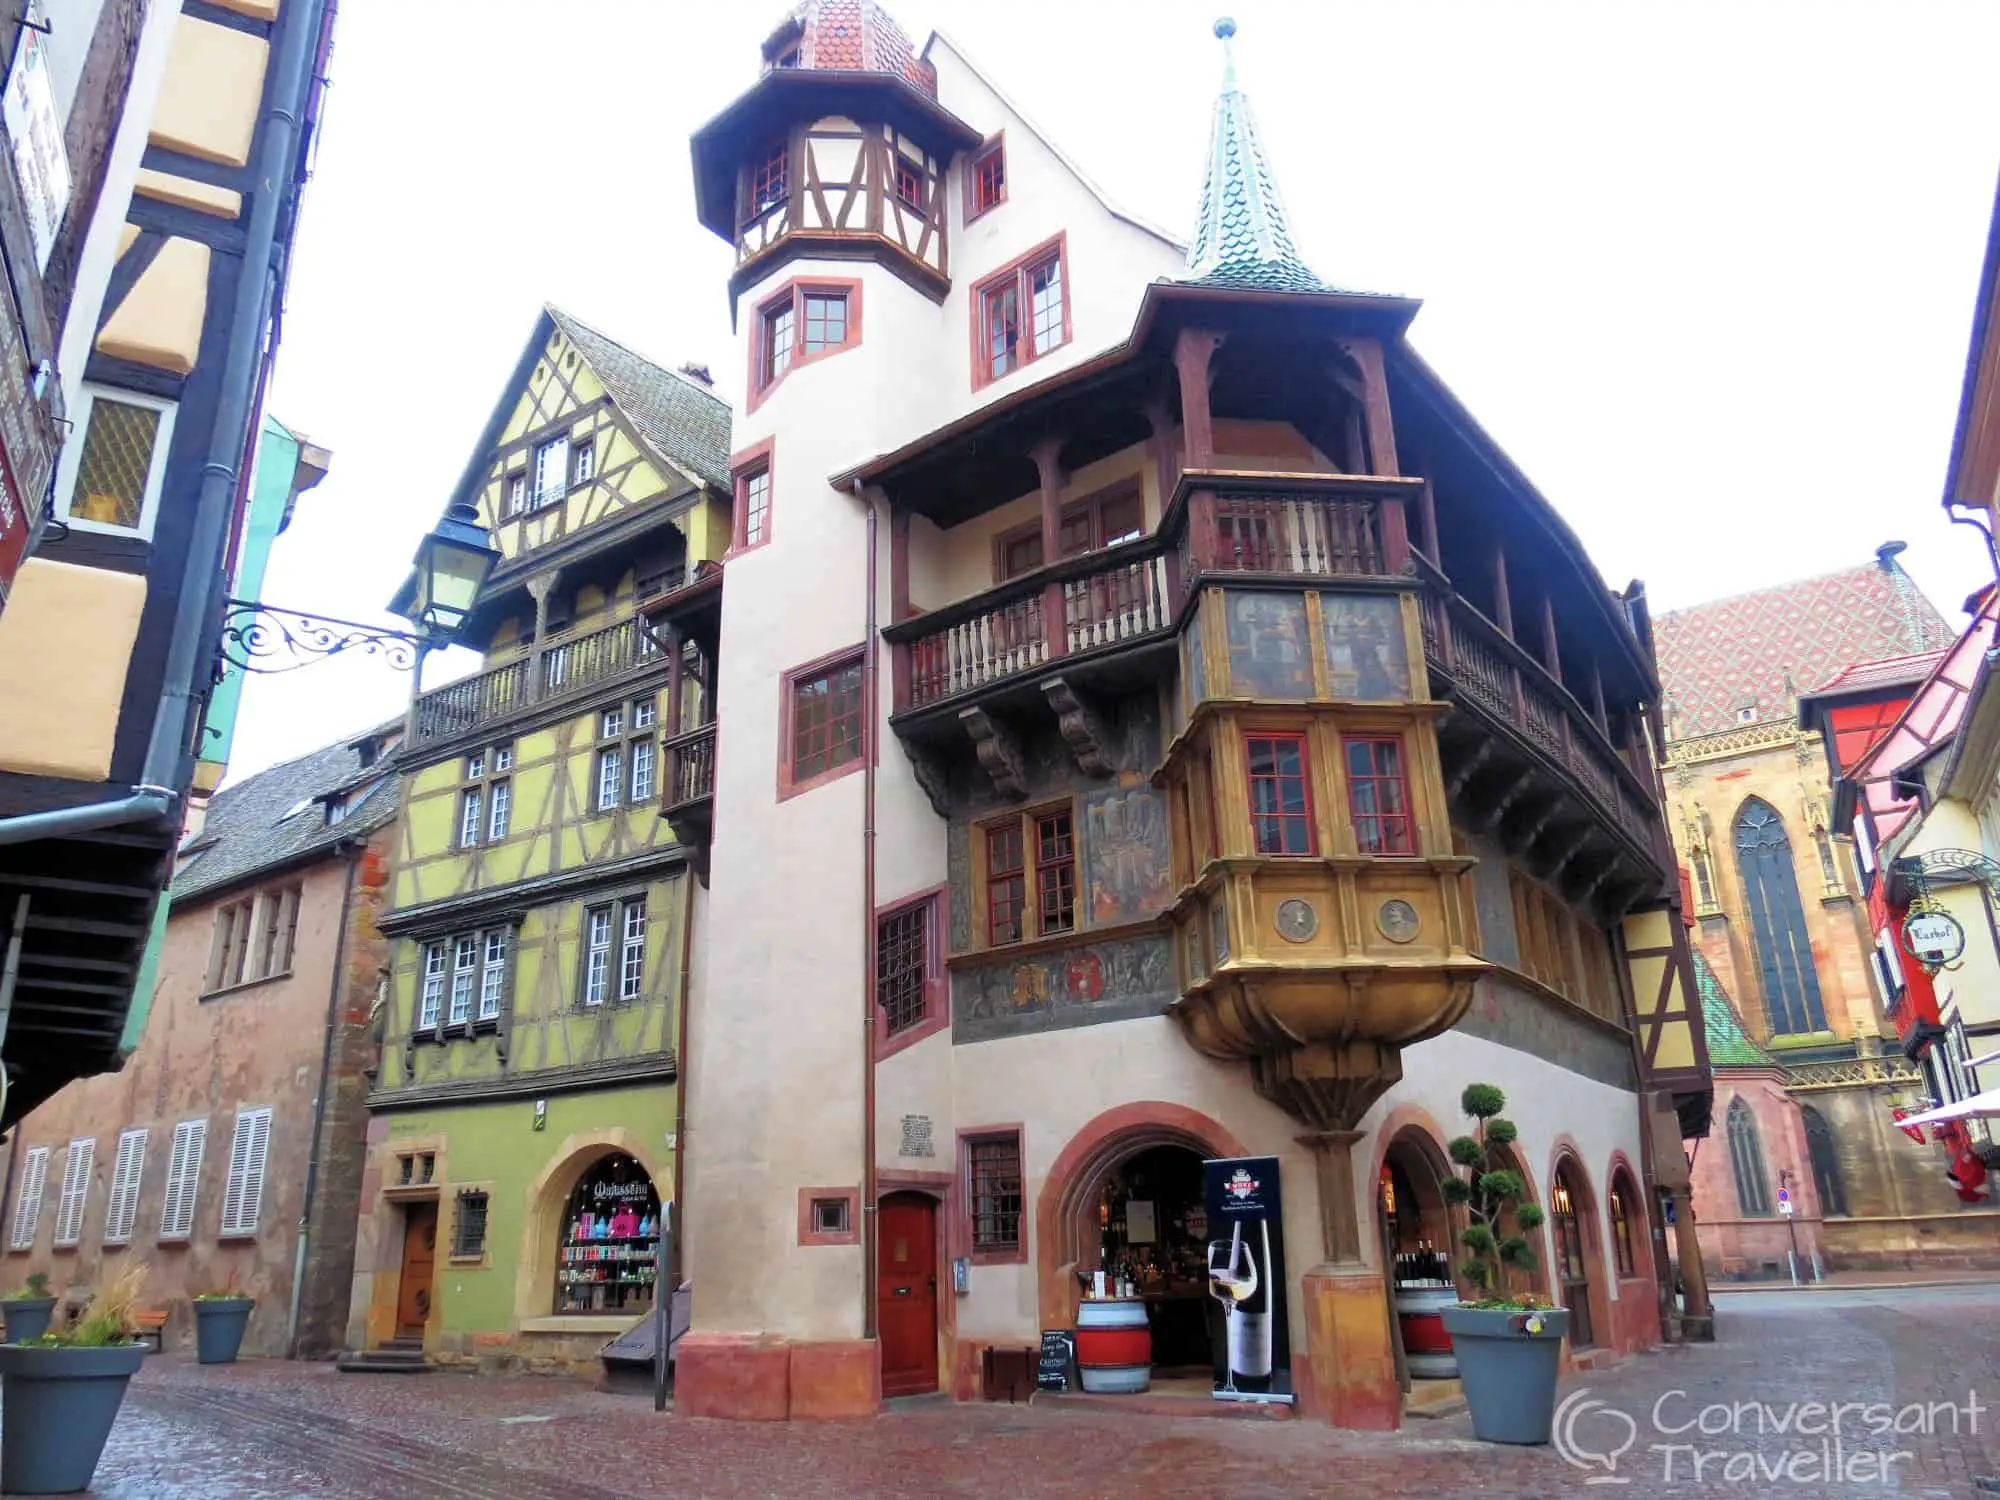 The Maison Pfister, a 16th Century medieval house built in renaissance design made of wood and stone, Colmar